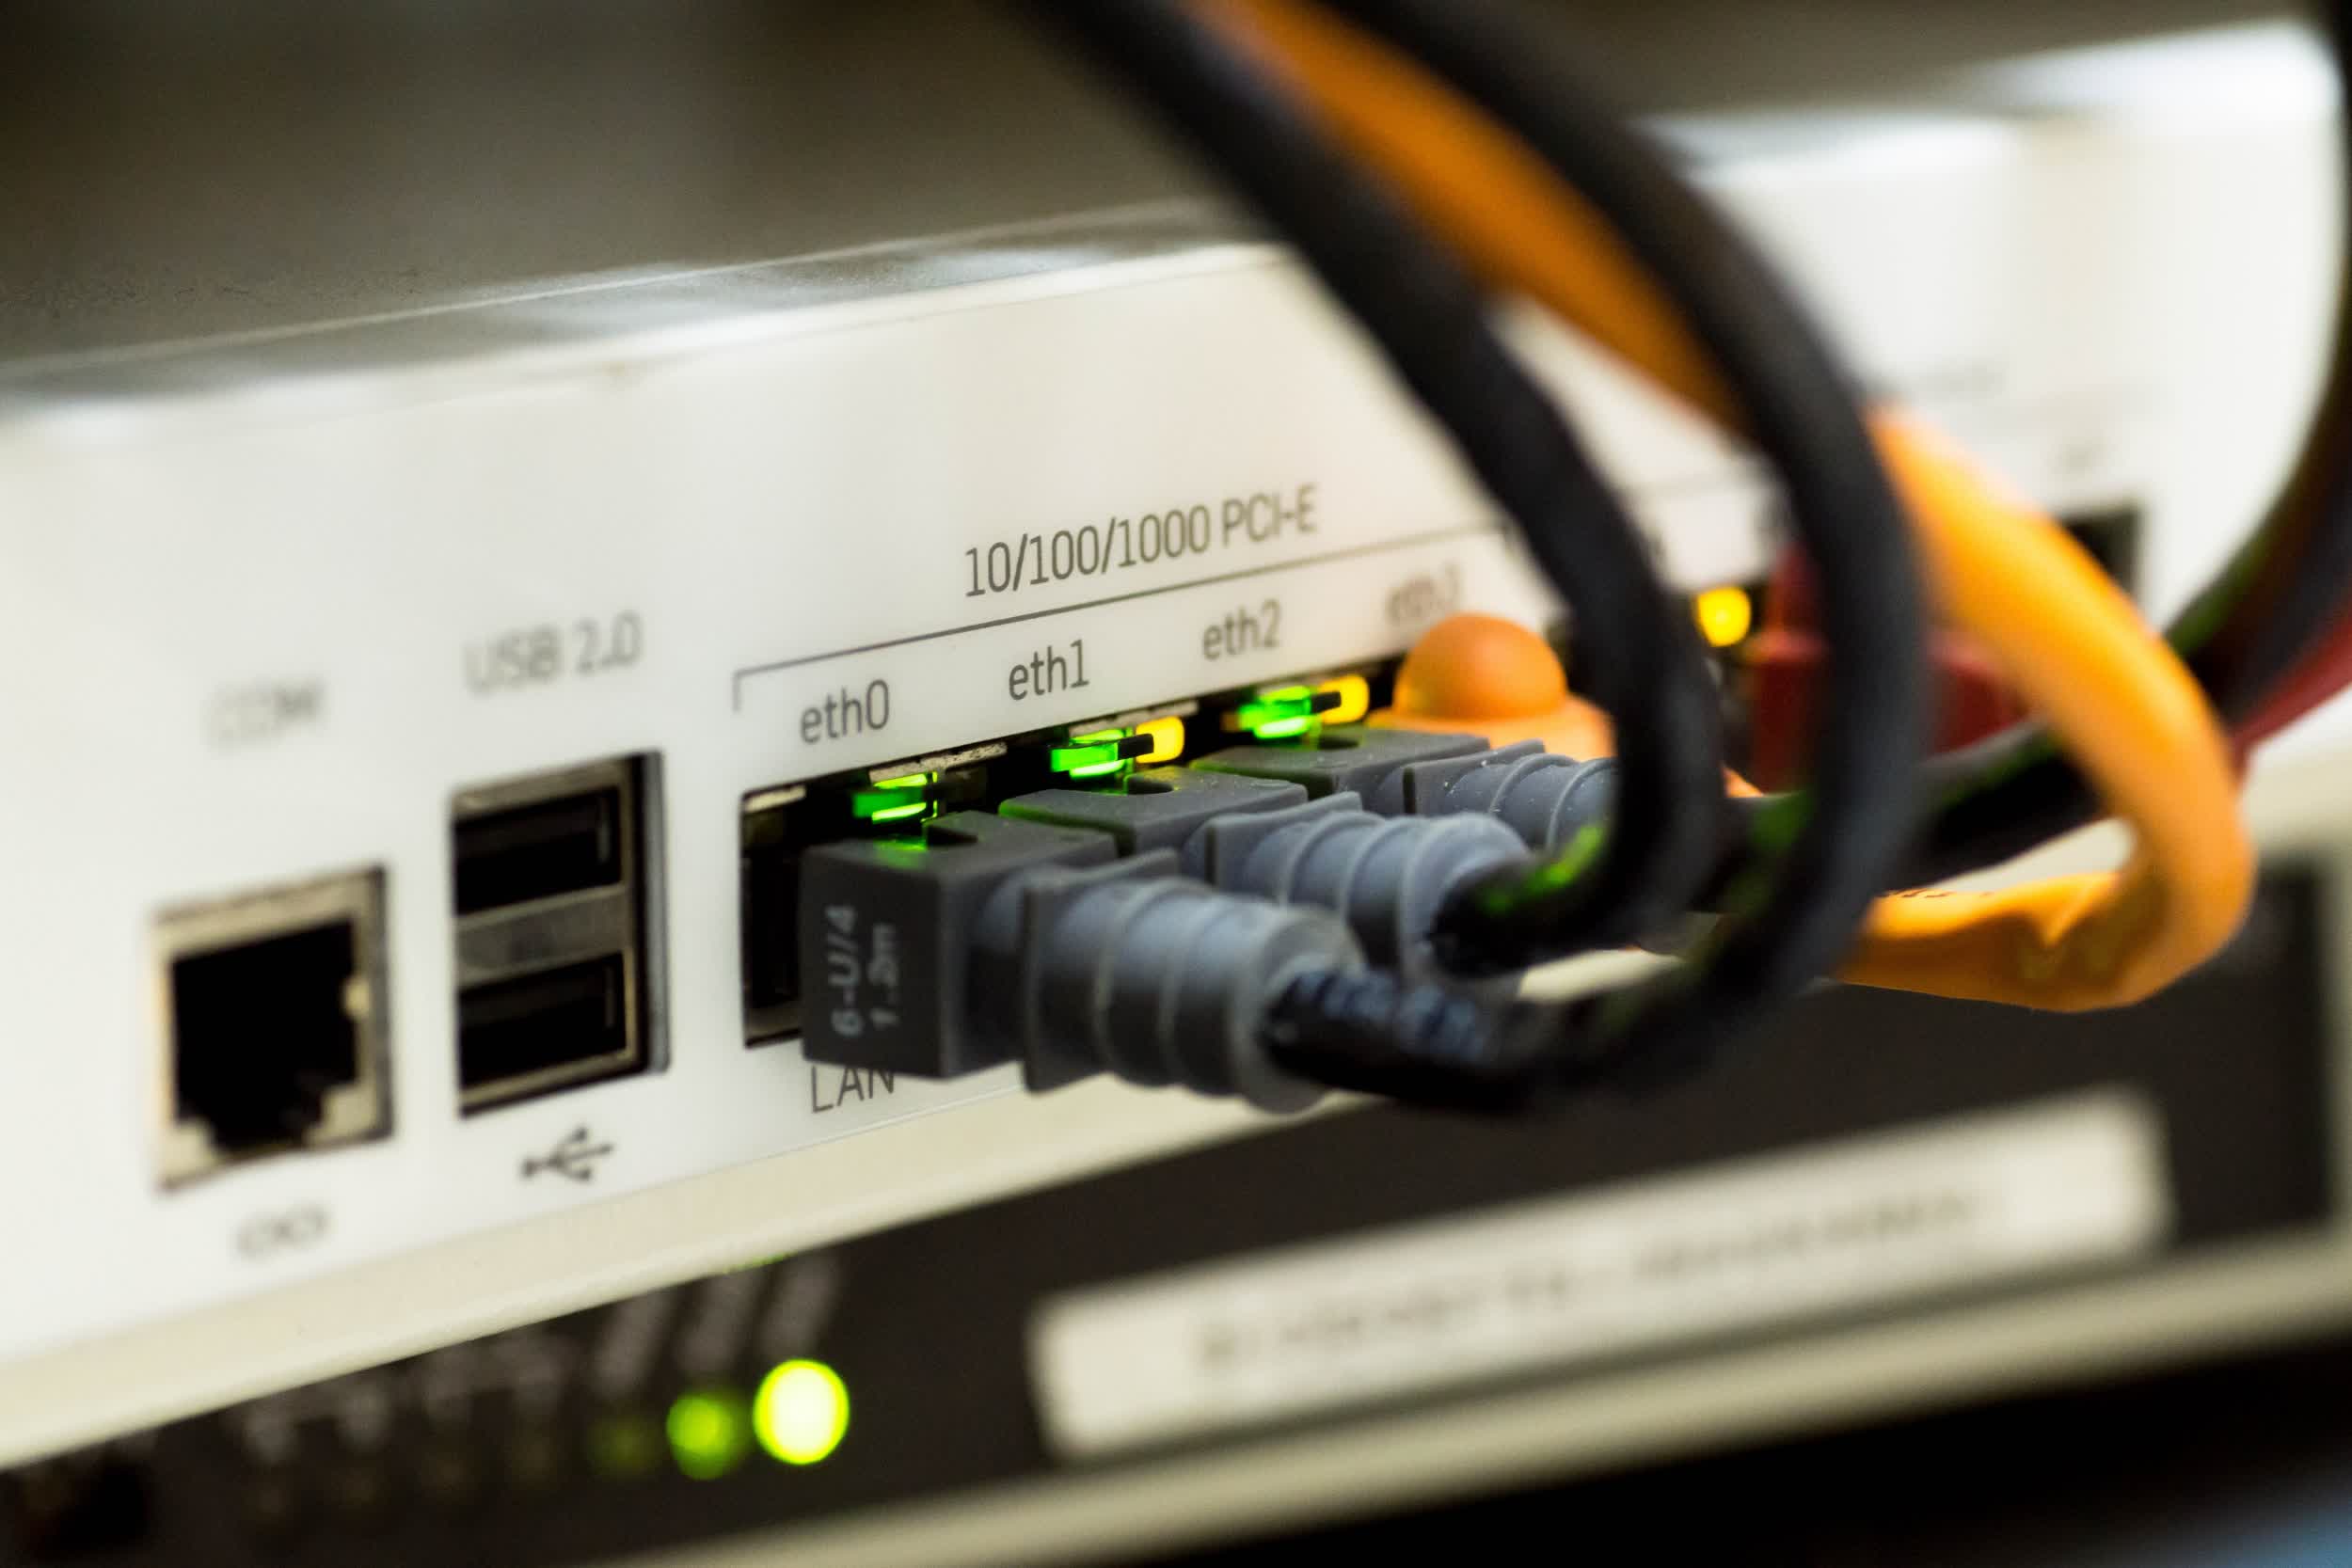 ISP launches first residential 50 Gbps service, costs $900 per month